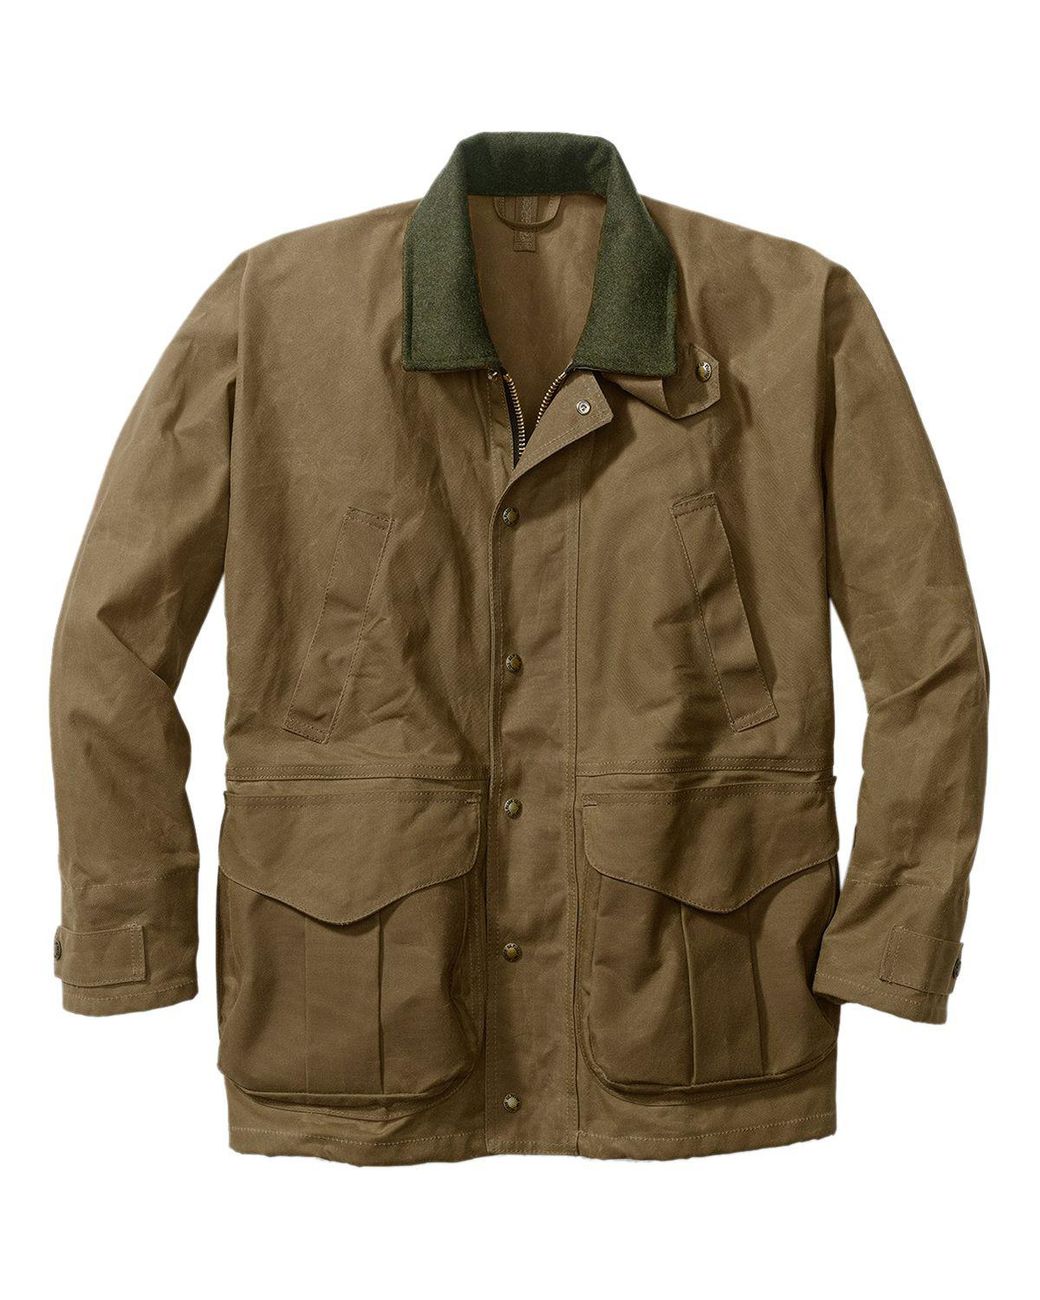 Filson Tin Cloth Field Jacket in Brown for Men - Lyst